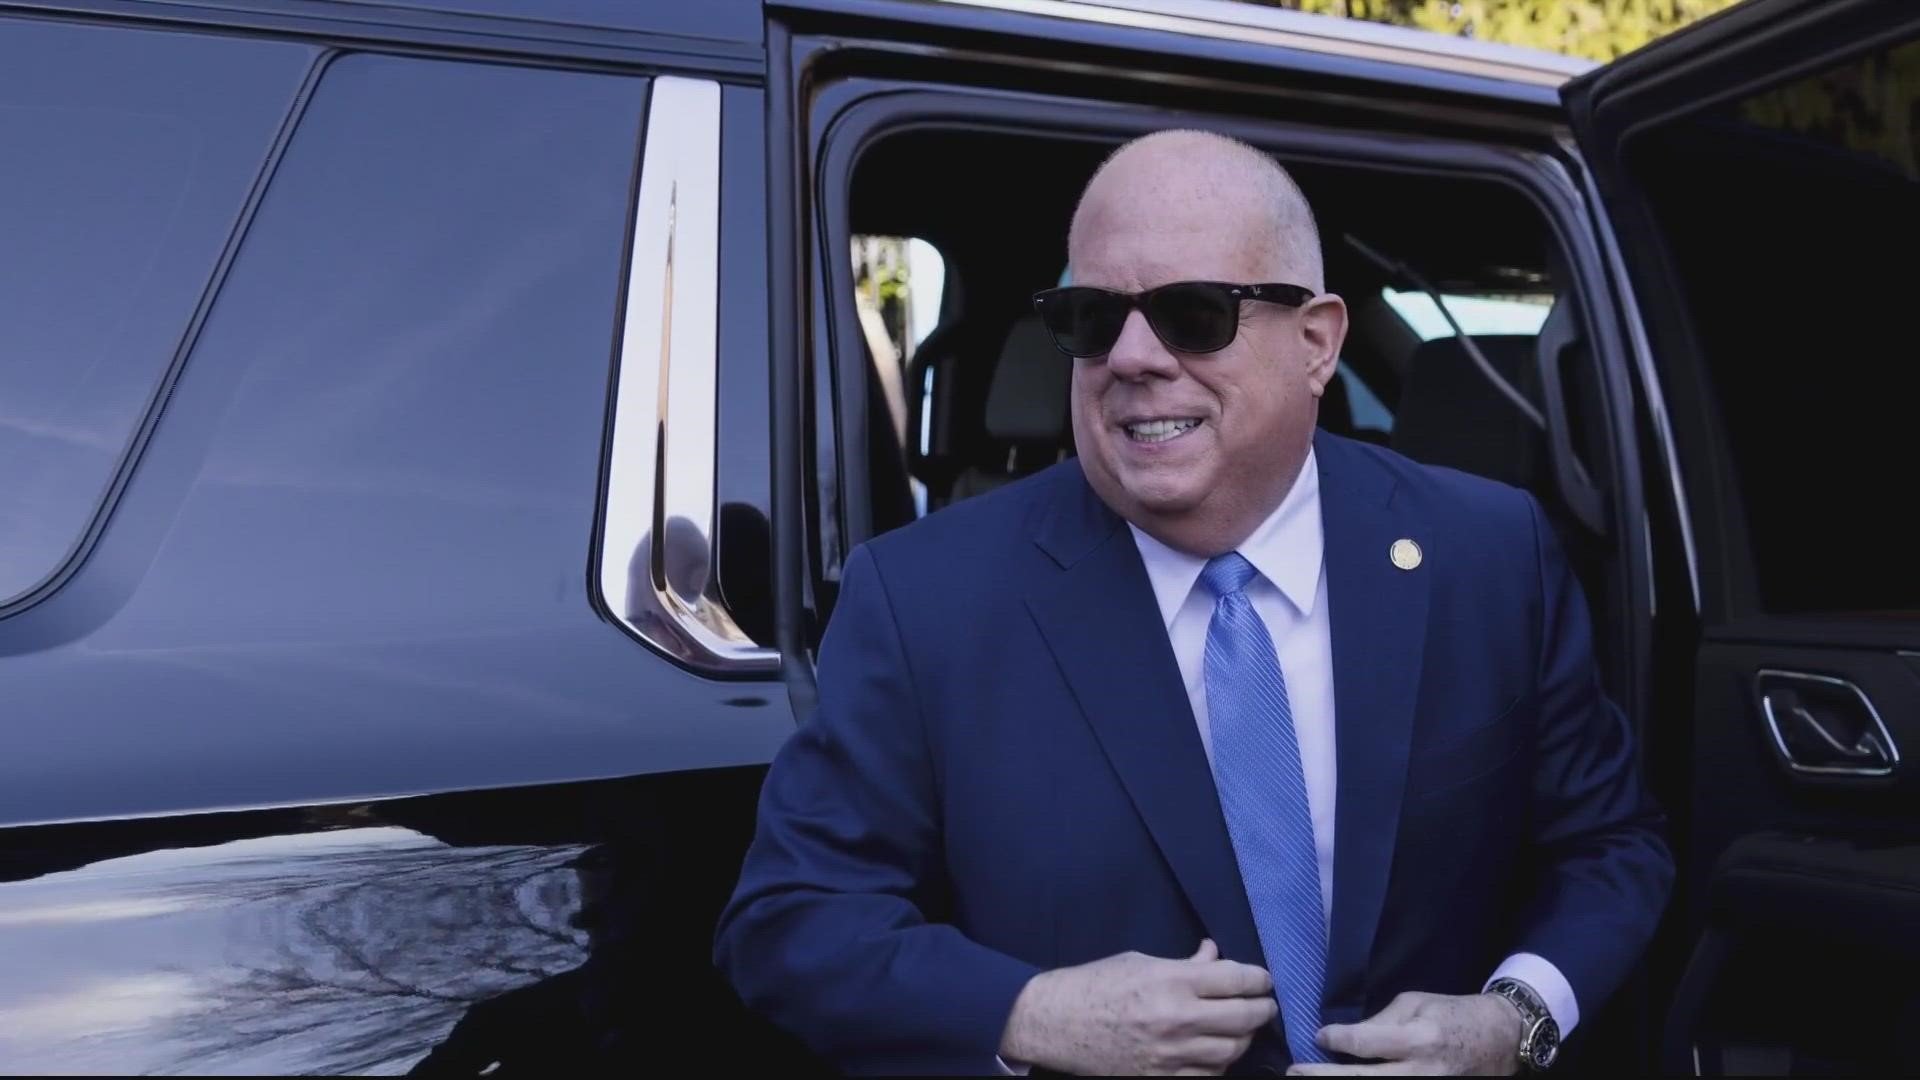 Hogan made the announcement on Face the Nation and said he decided against it after a lot of consideration.